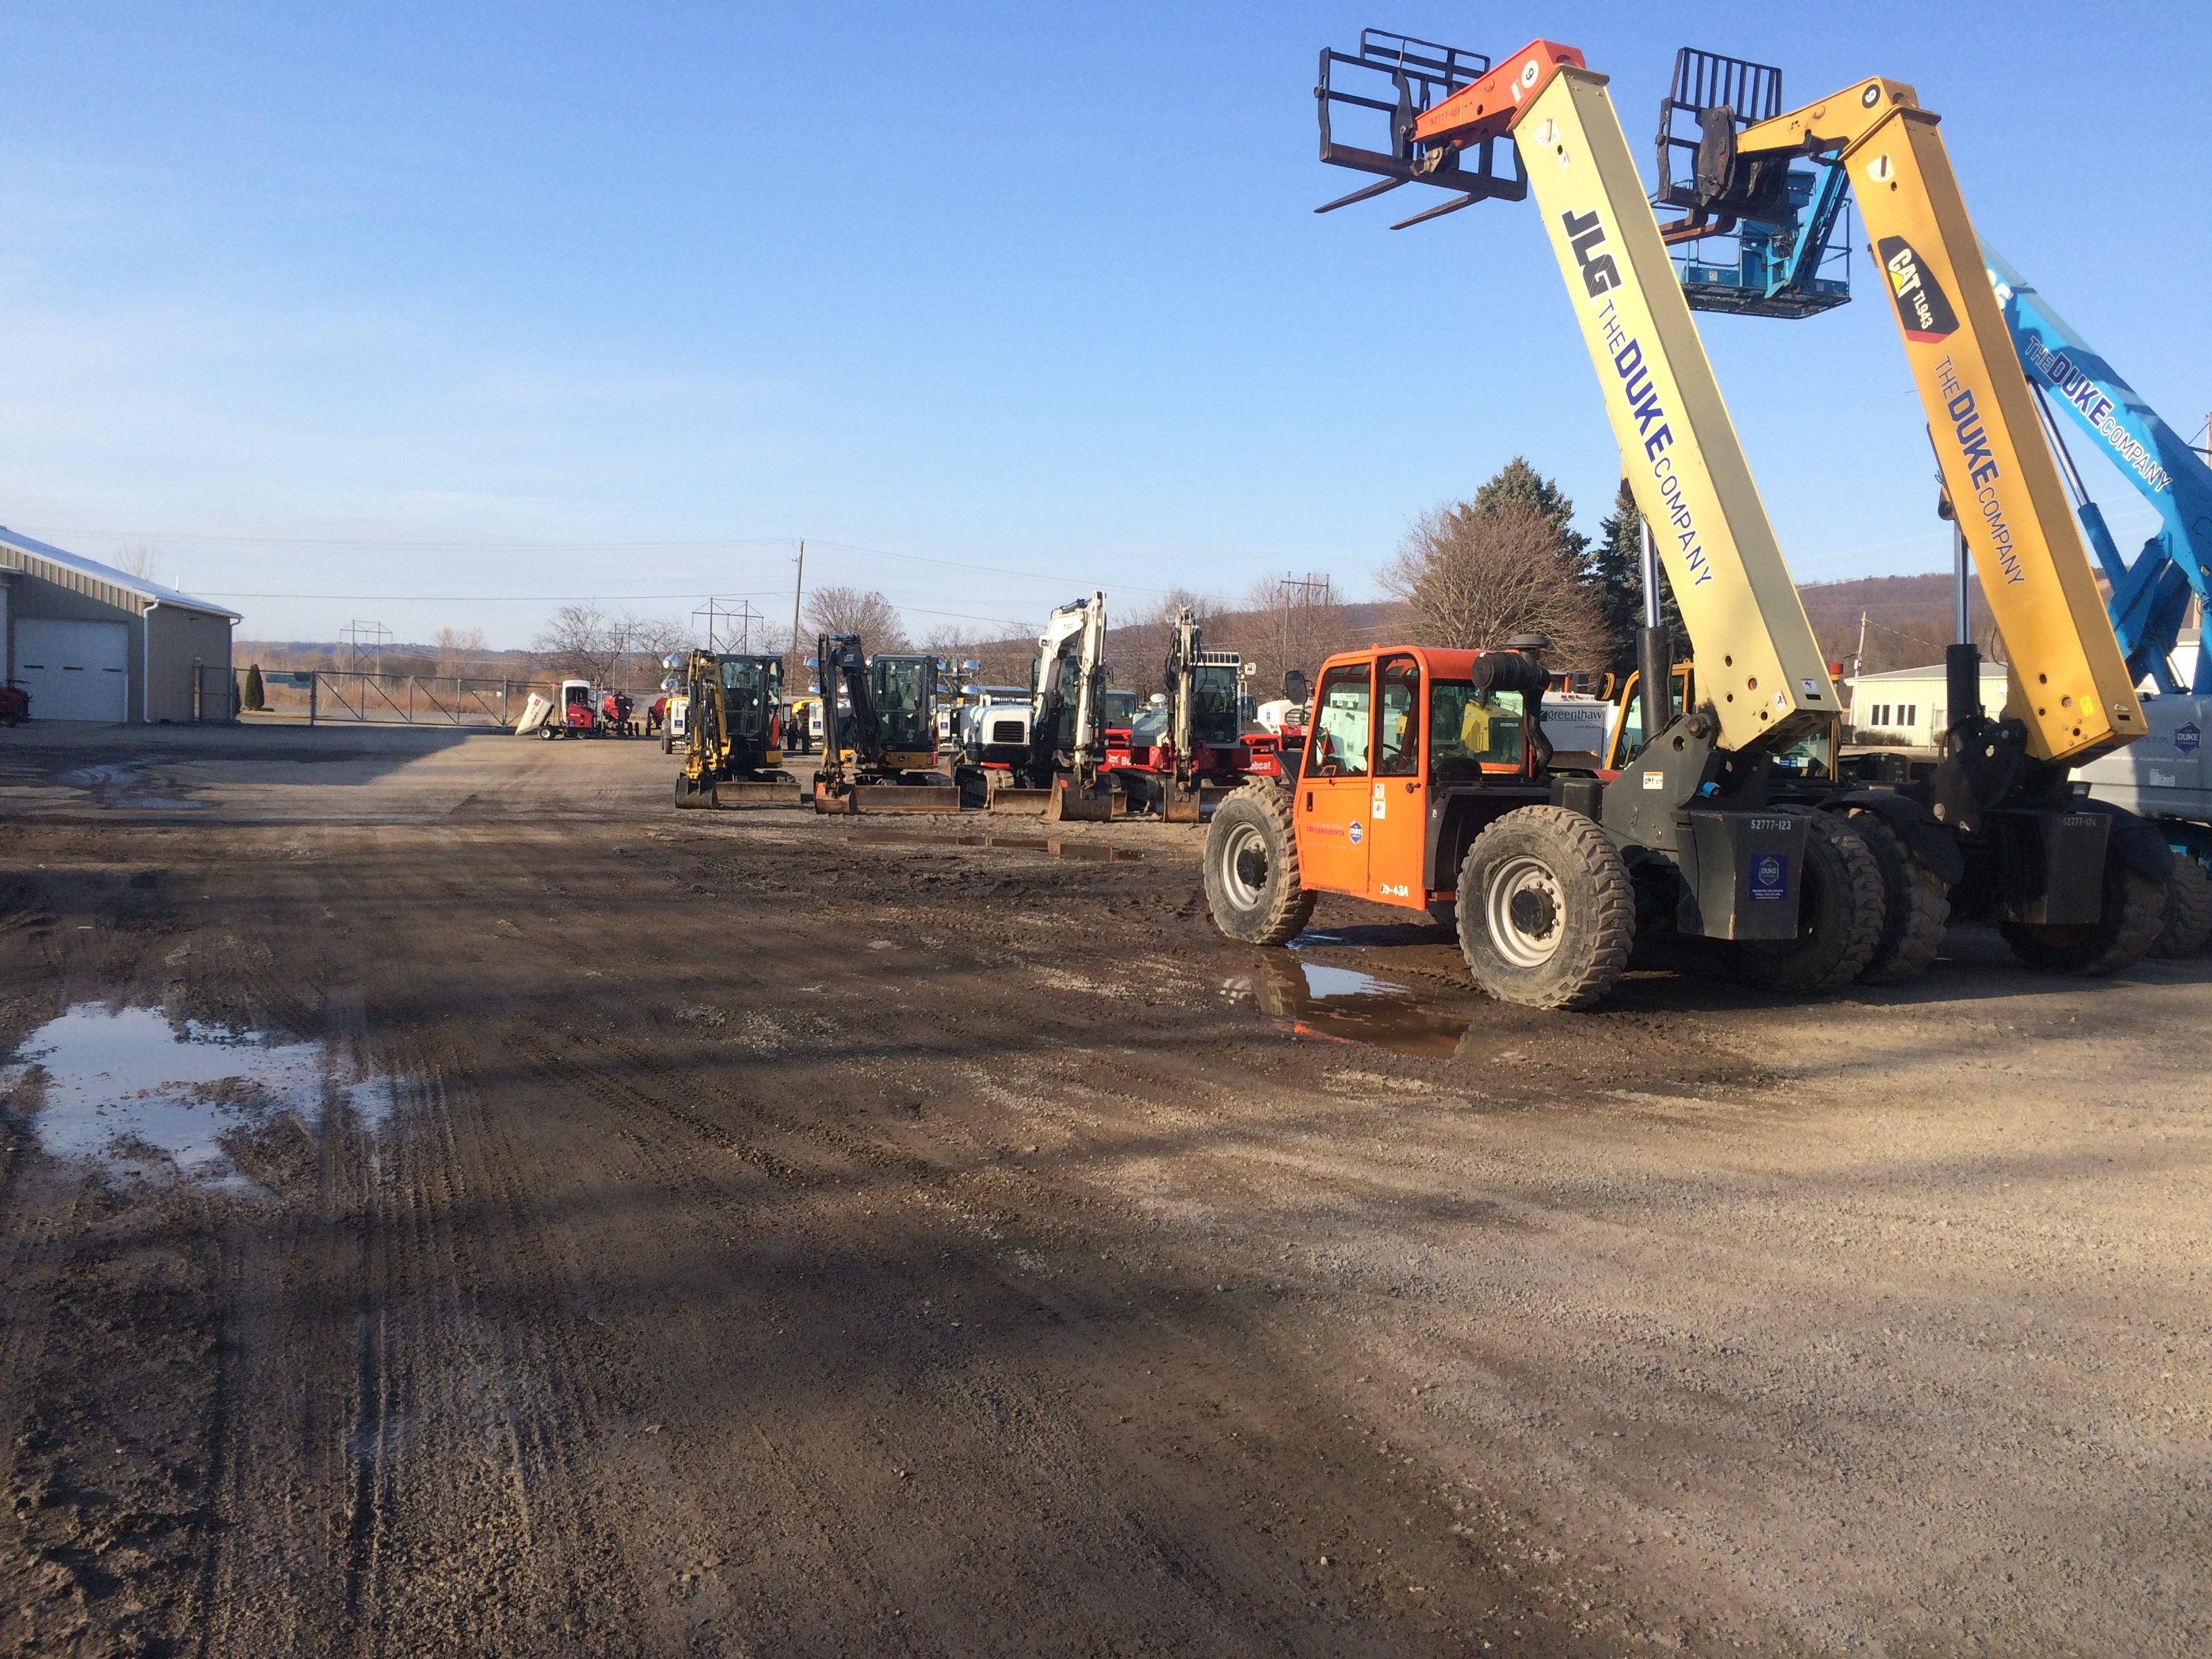 Dansville Ny Rental Equipment Construction Dumpster Rental And Building Supplies The Duke Company Equipment Rental Building Products Concrete Forms Ice Control Equipment Rental Tool Rental Rock Salt Roll Off